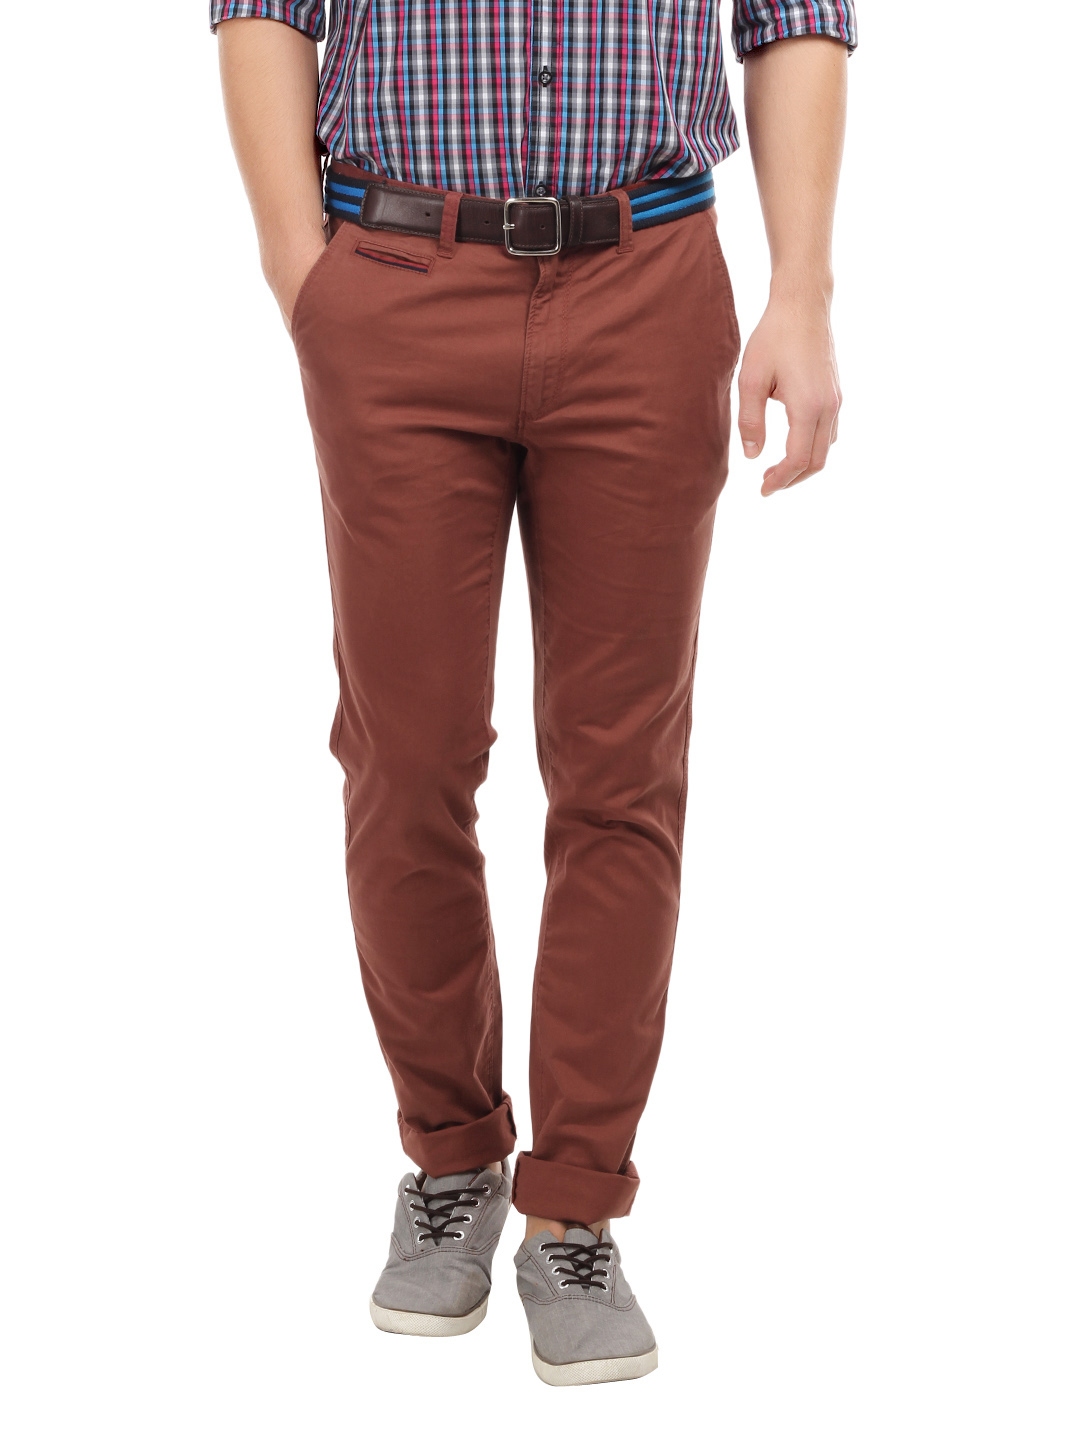 Buy Being Human Men Brick Red Cargo Trousers  Trousers for Men 209426   Myntra